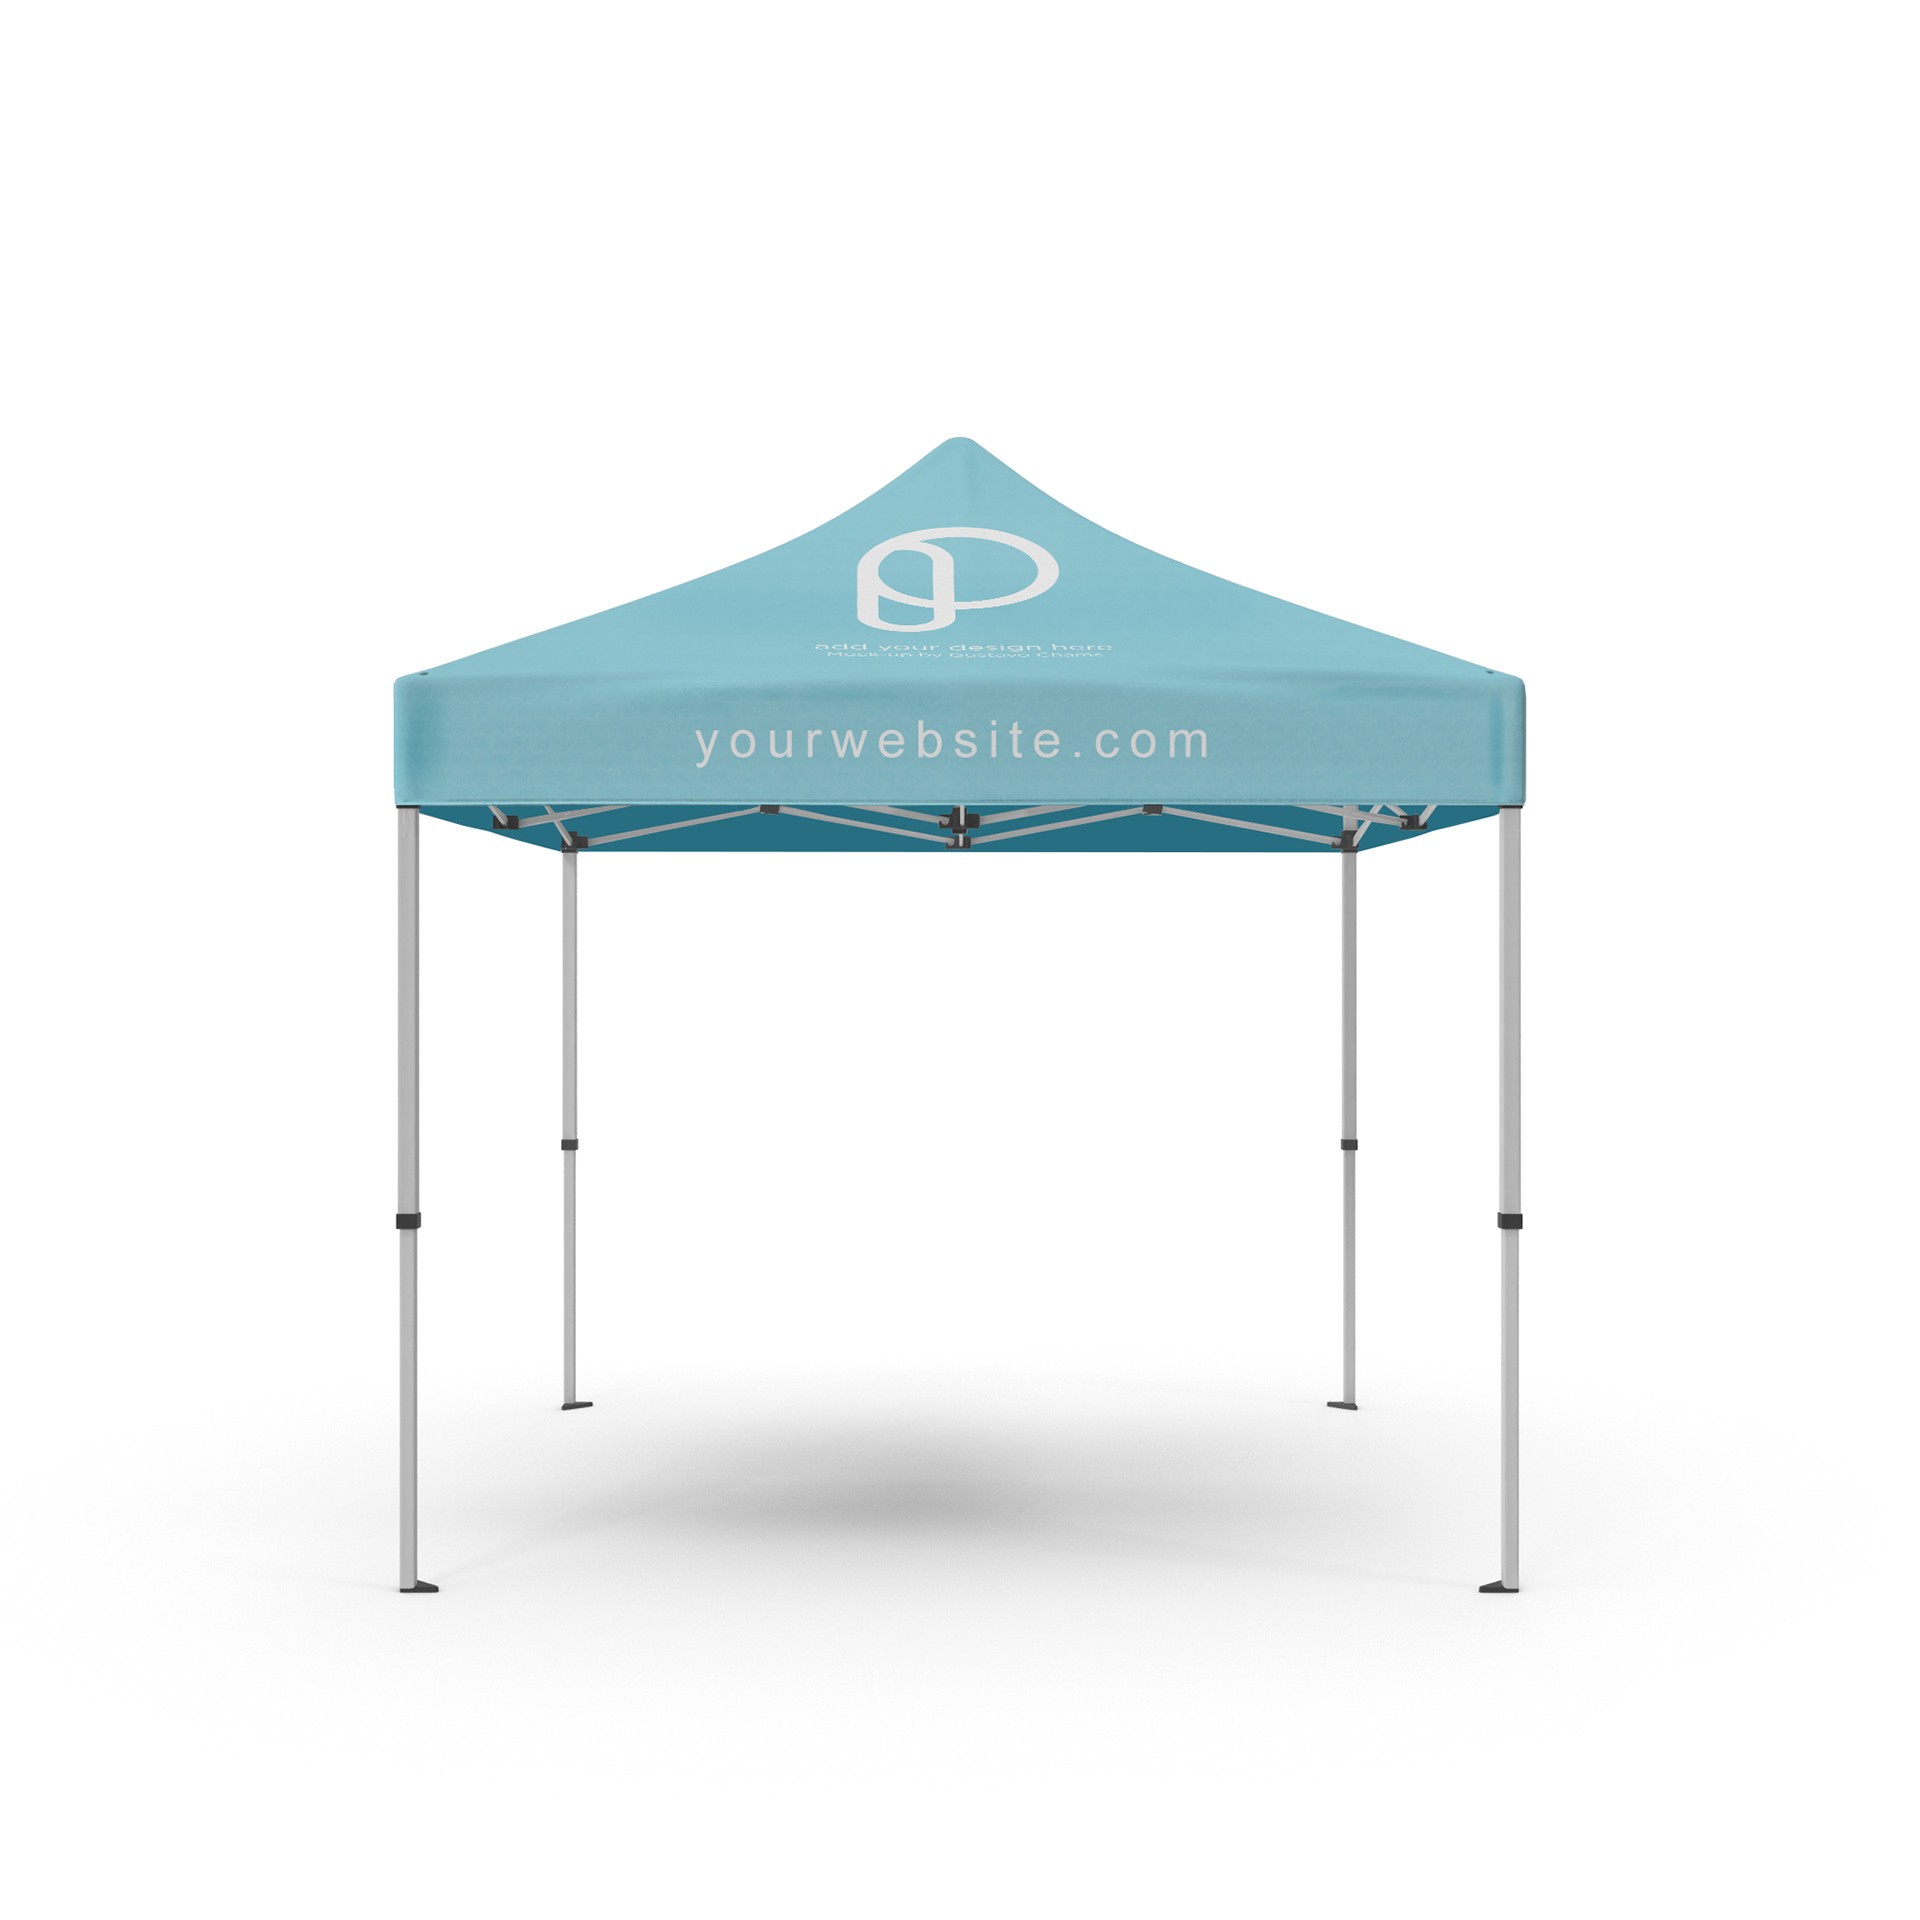 Download Free square canopy tent mockup - Free Mockup Download